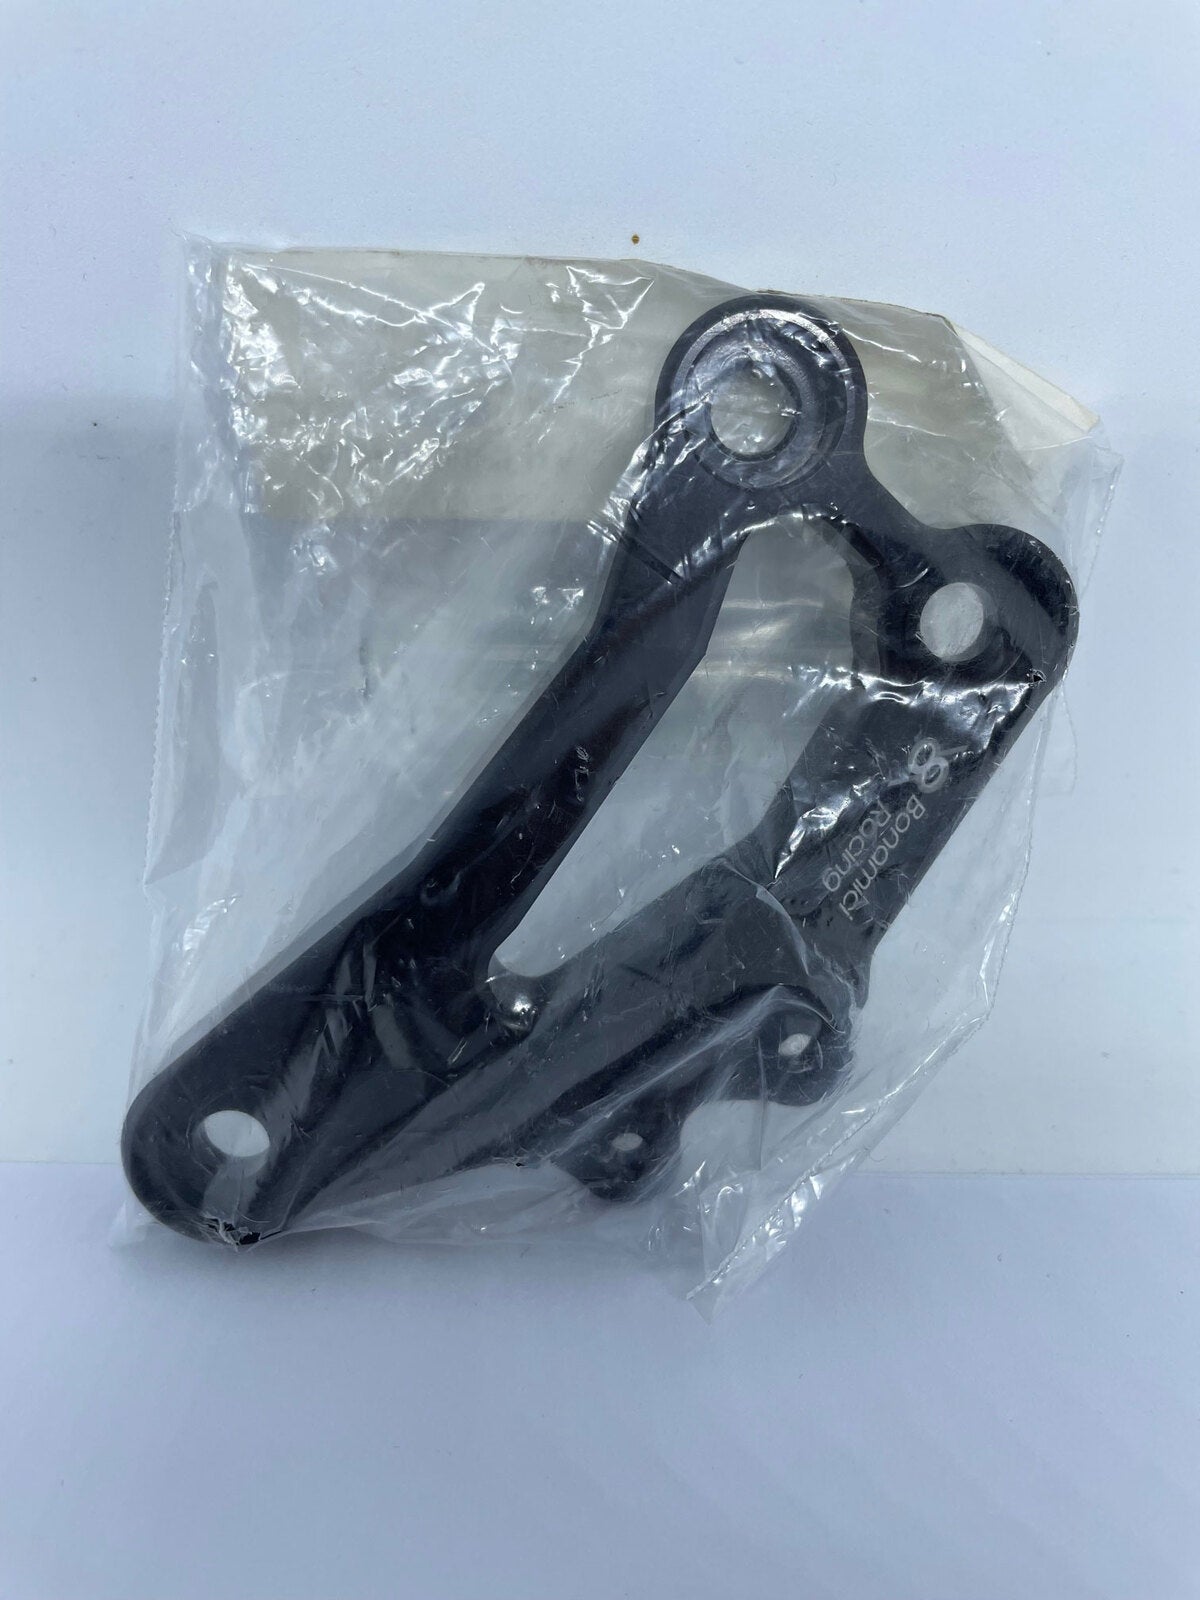 Bonamici Racing Spare Plate To Suit Yamaha YZF-R6 2006 - 2016 Rearsets